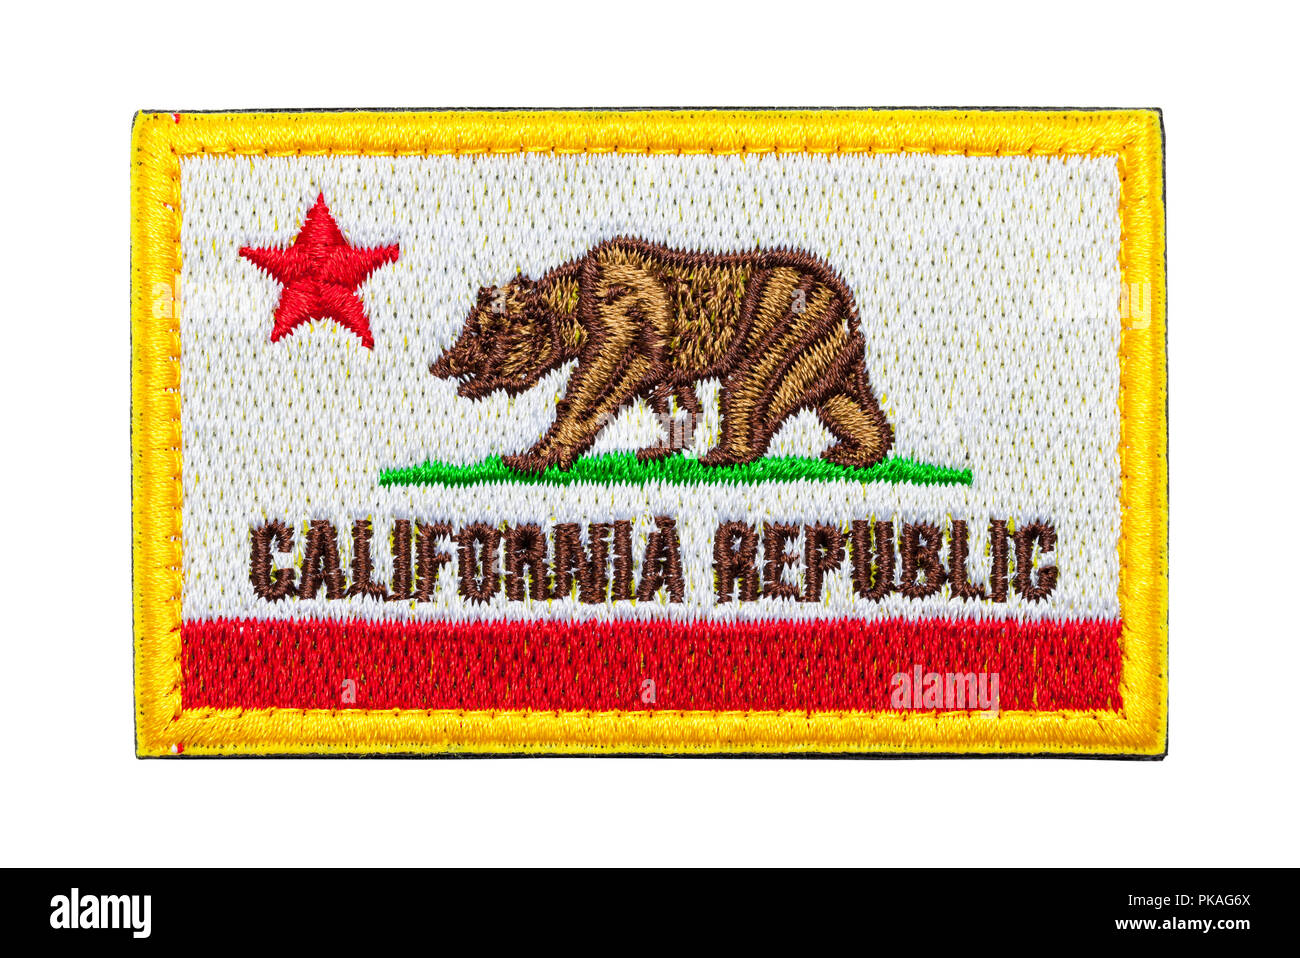 California Republic Flag Patch Isolated on White. Stock Photo